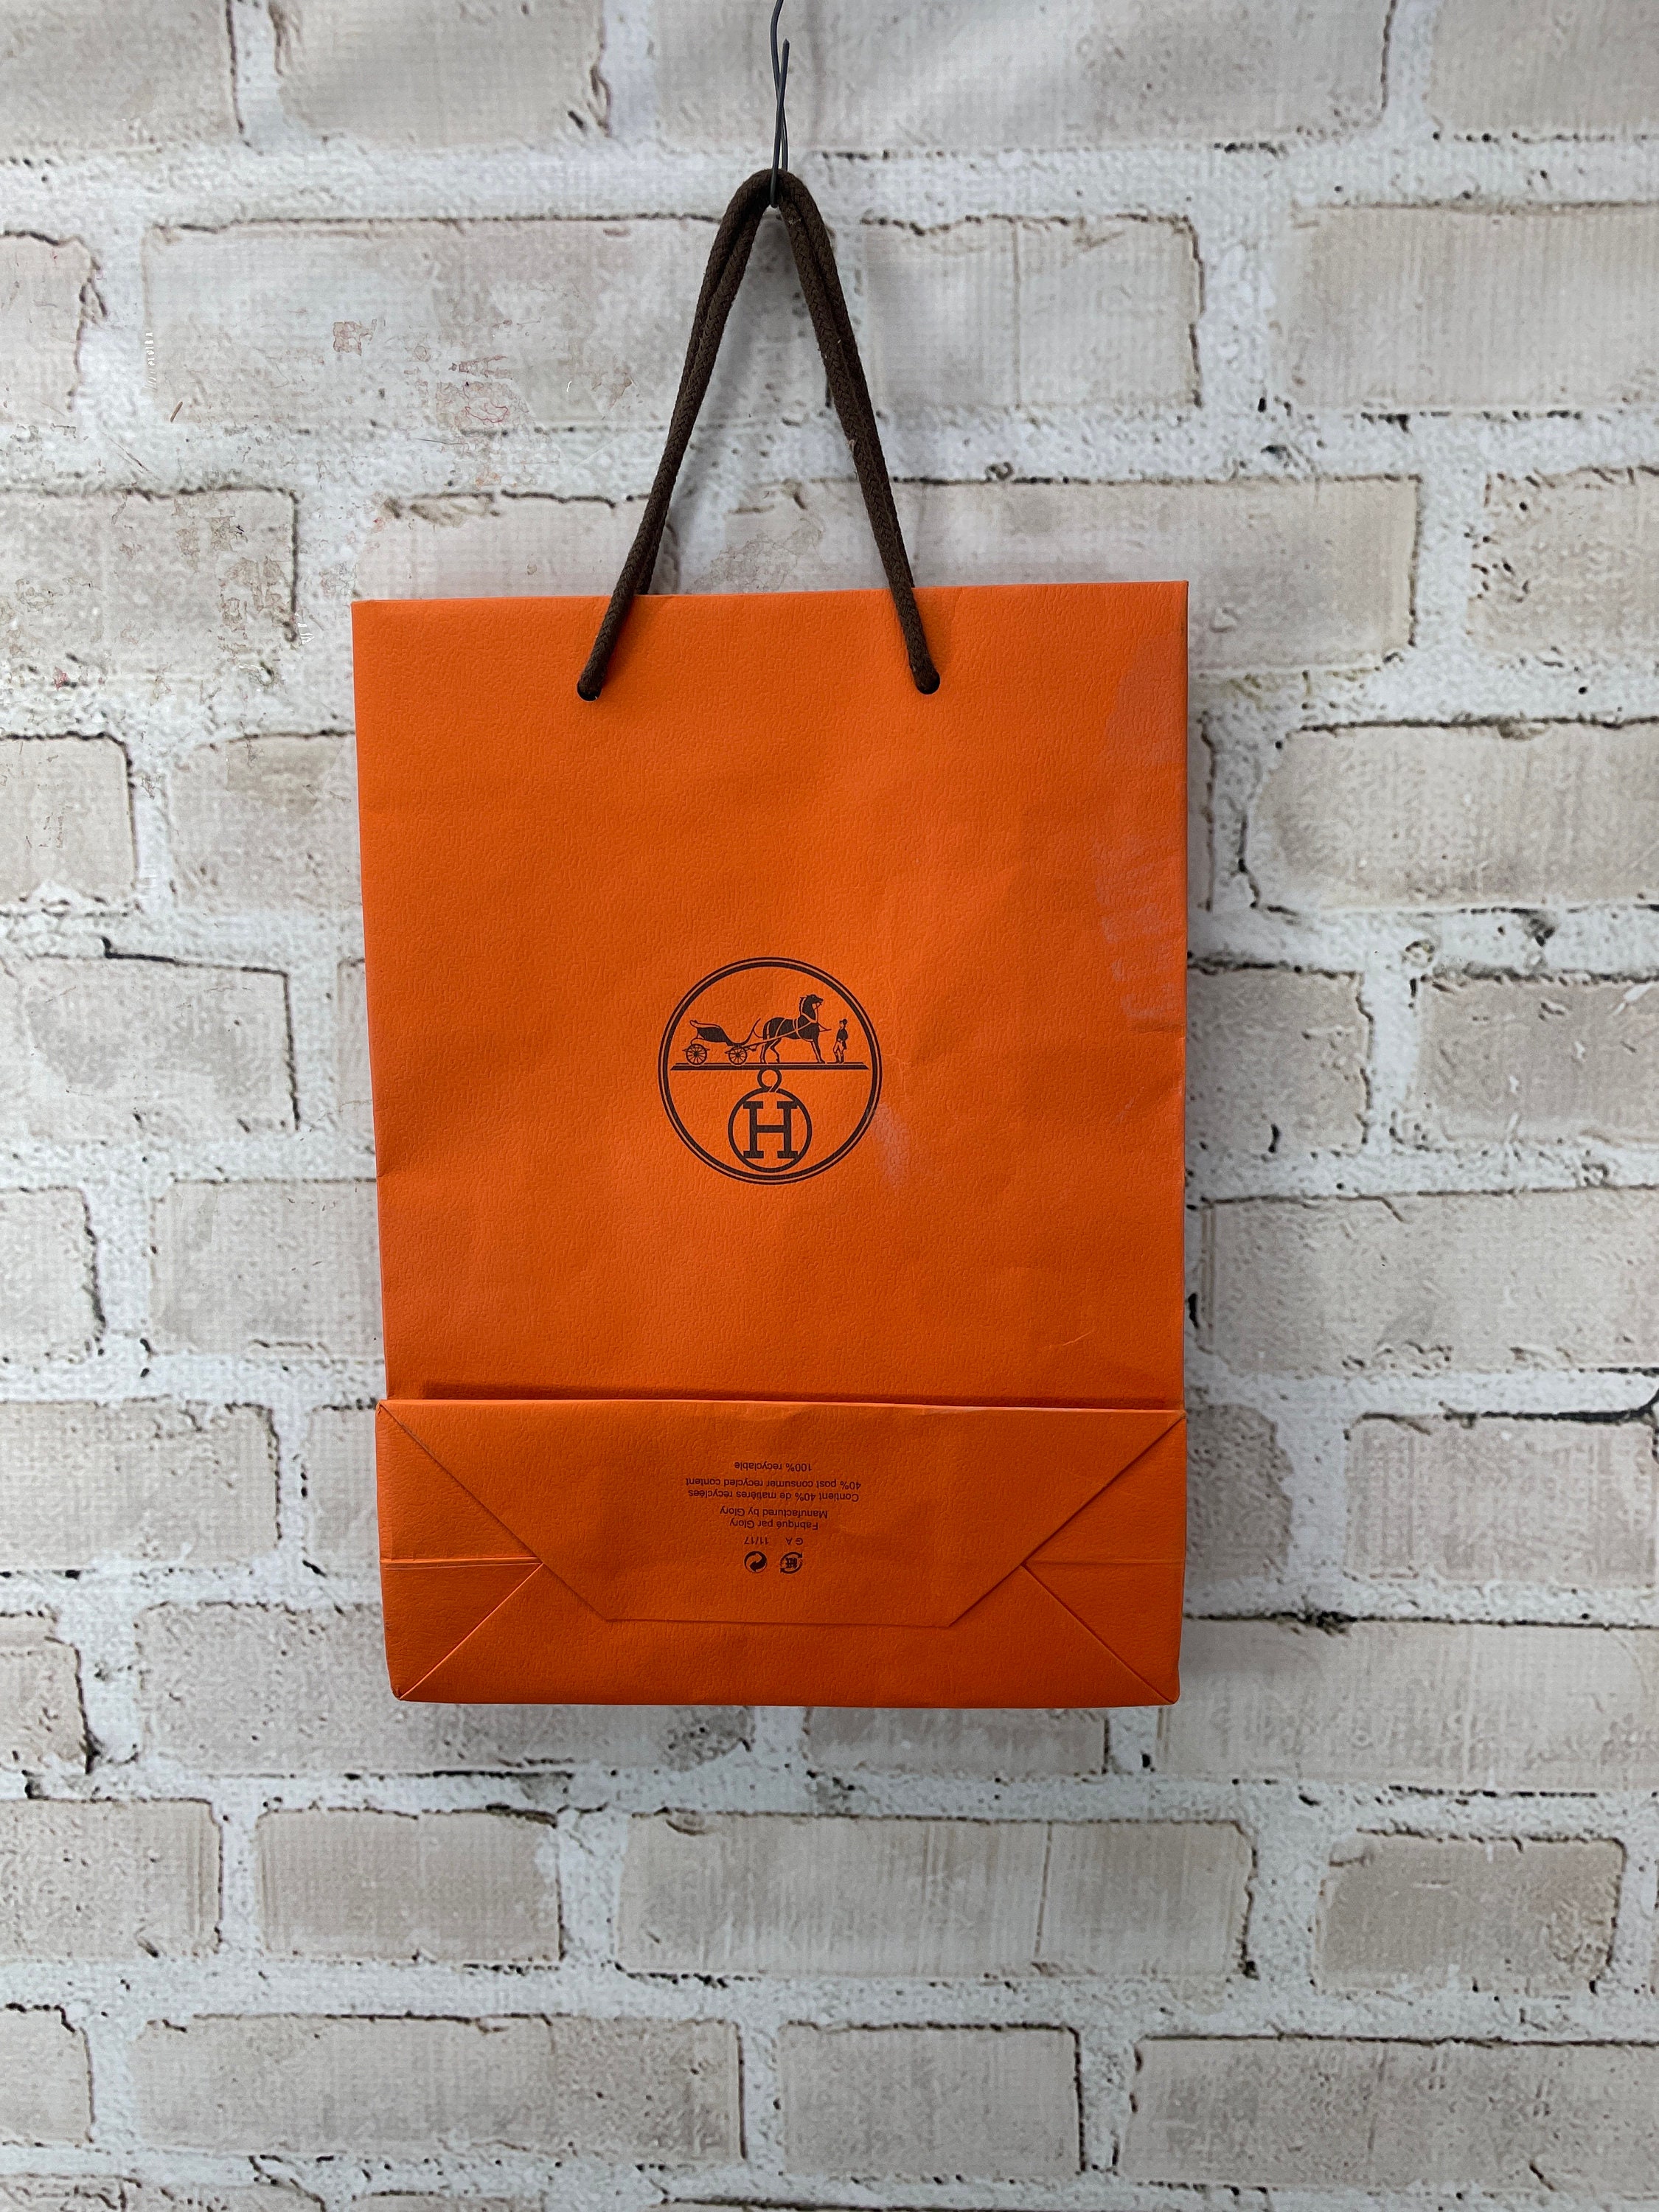 Hermes Authentic Shopping Bag, Large Paper Gift Bag 11x18.5x4” (empty)